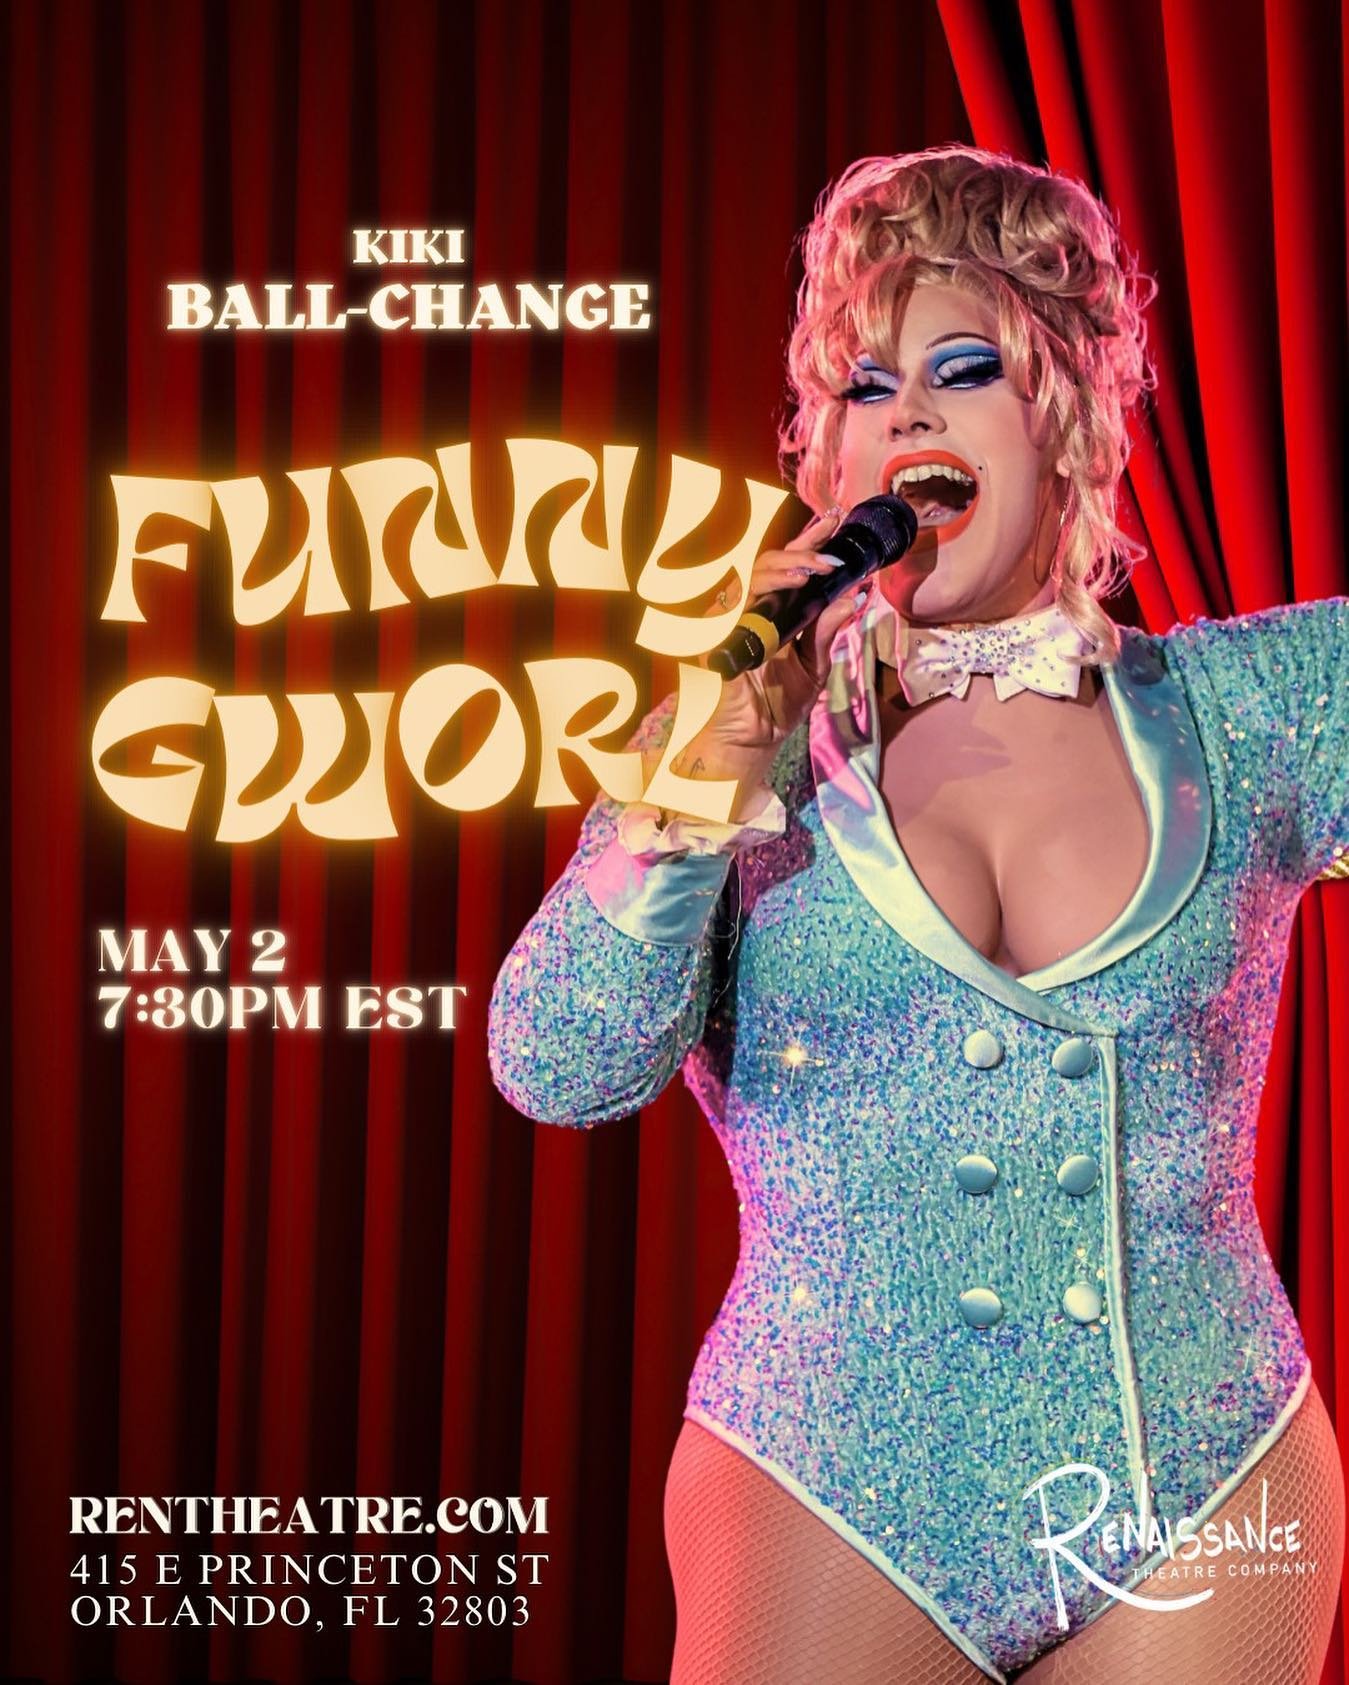 The hilarious, live-singing, off-off-off-Broadway sensation KIKI BALL-CHANGE (Drag Me to Dinner) is bringing her award-winning, one-woman show FUNNY GWORL to Ren Theatre on May 2. Link in Bio for tickets

Kiki goes back to her musical theatre roots w